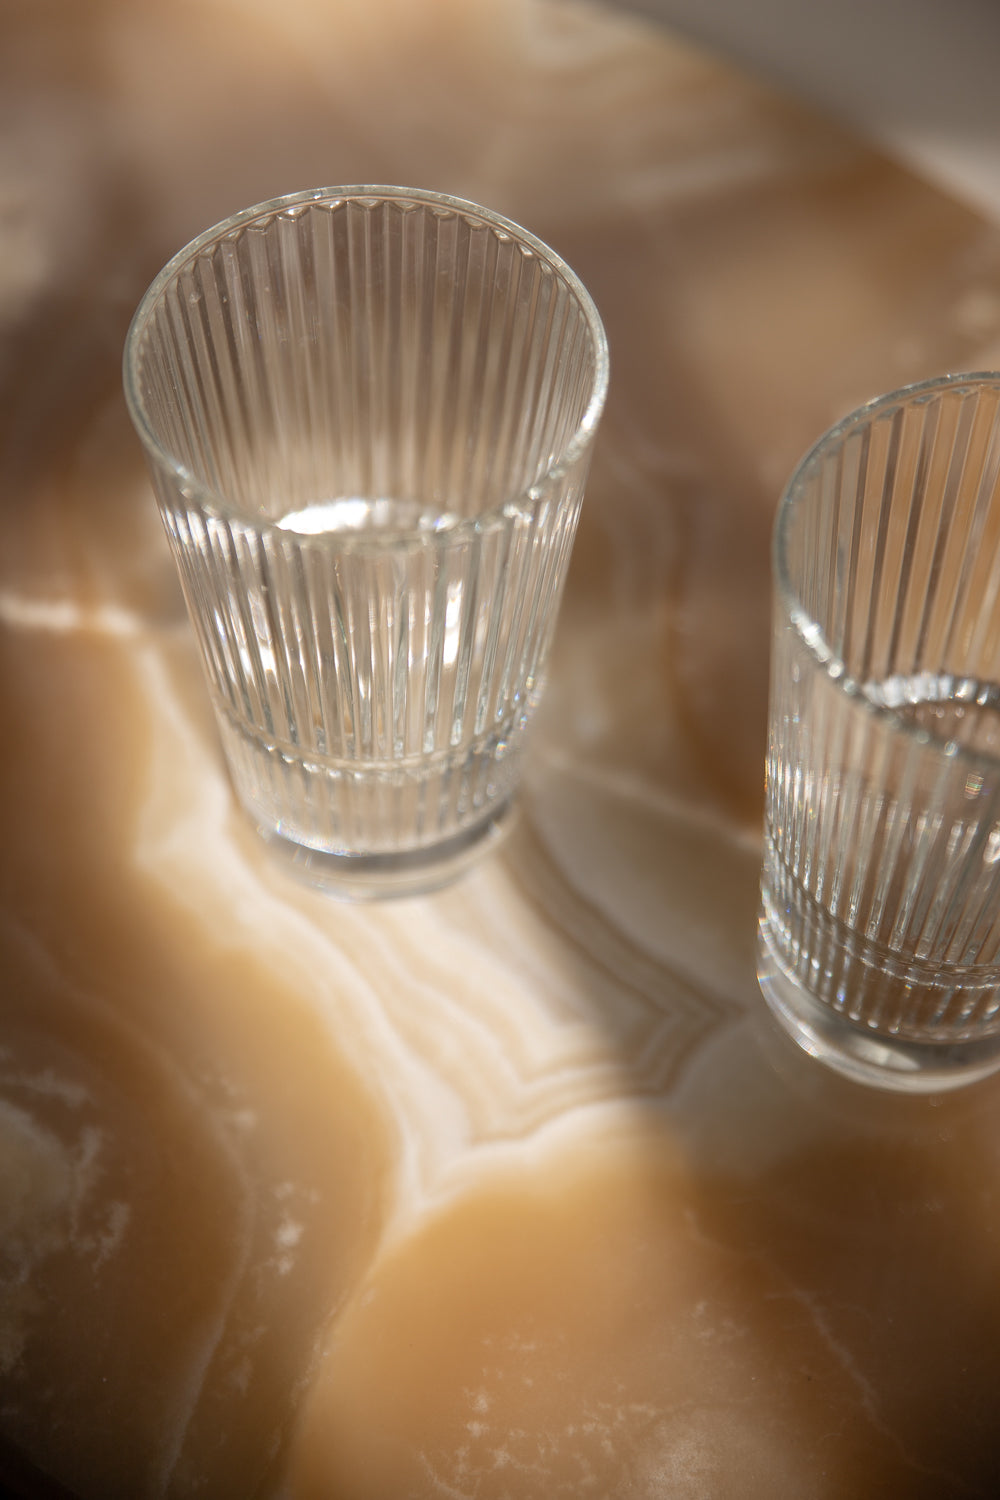 Set of 2 Ribbed Drinking Glasses